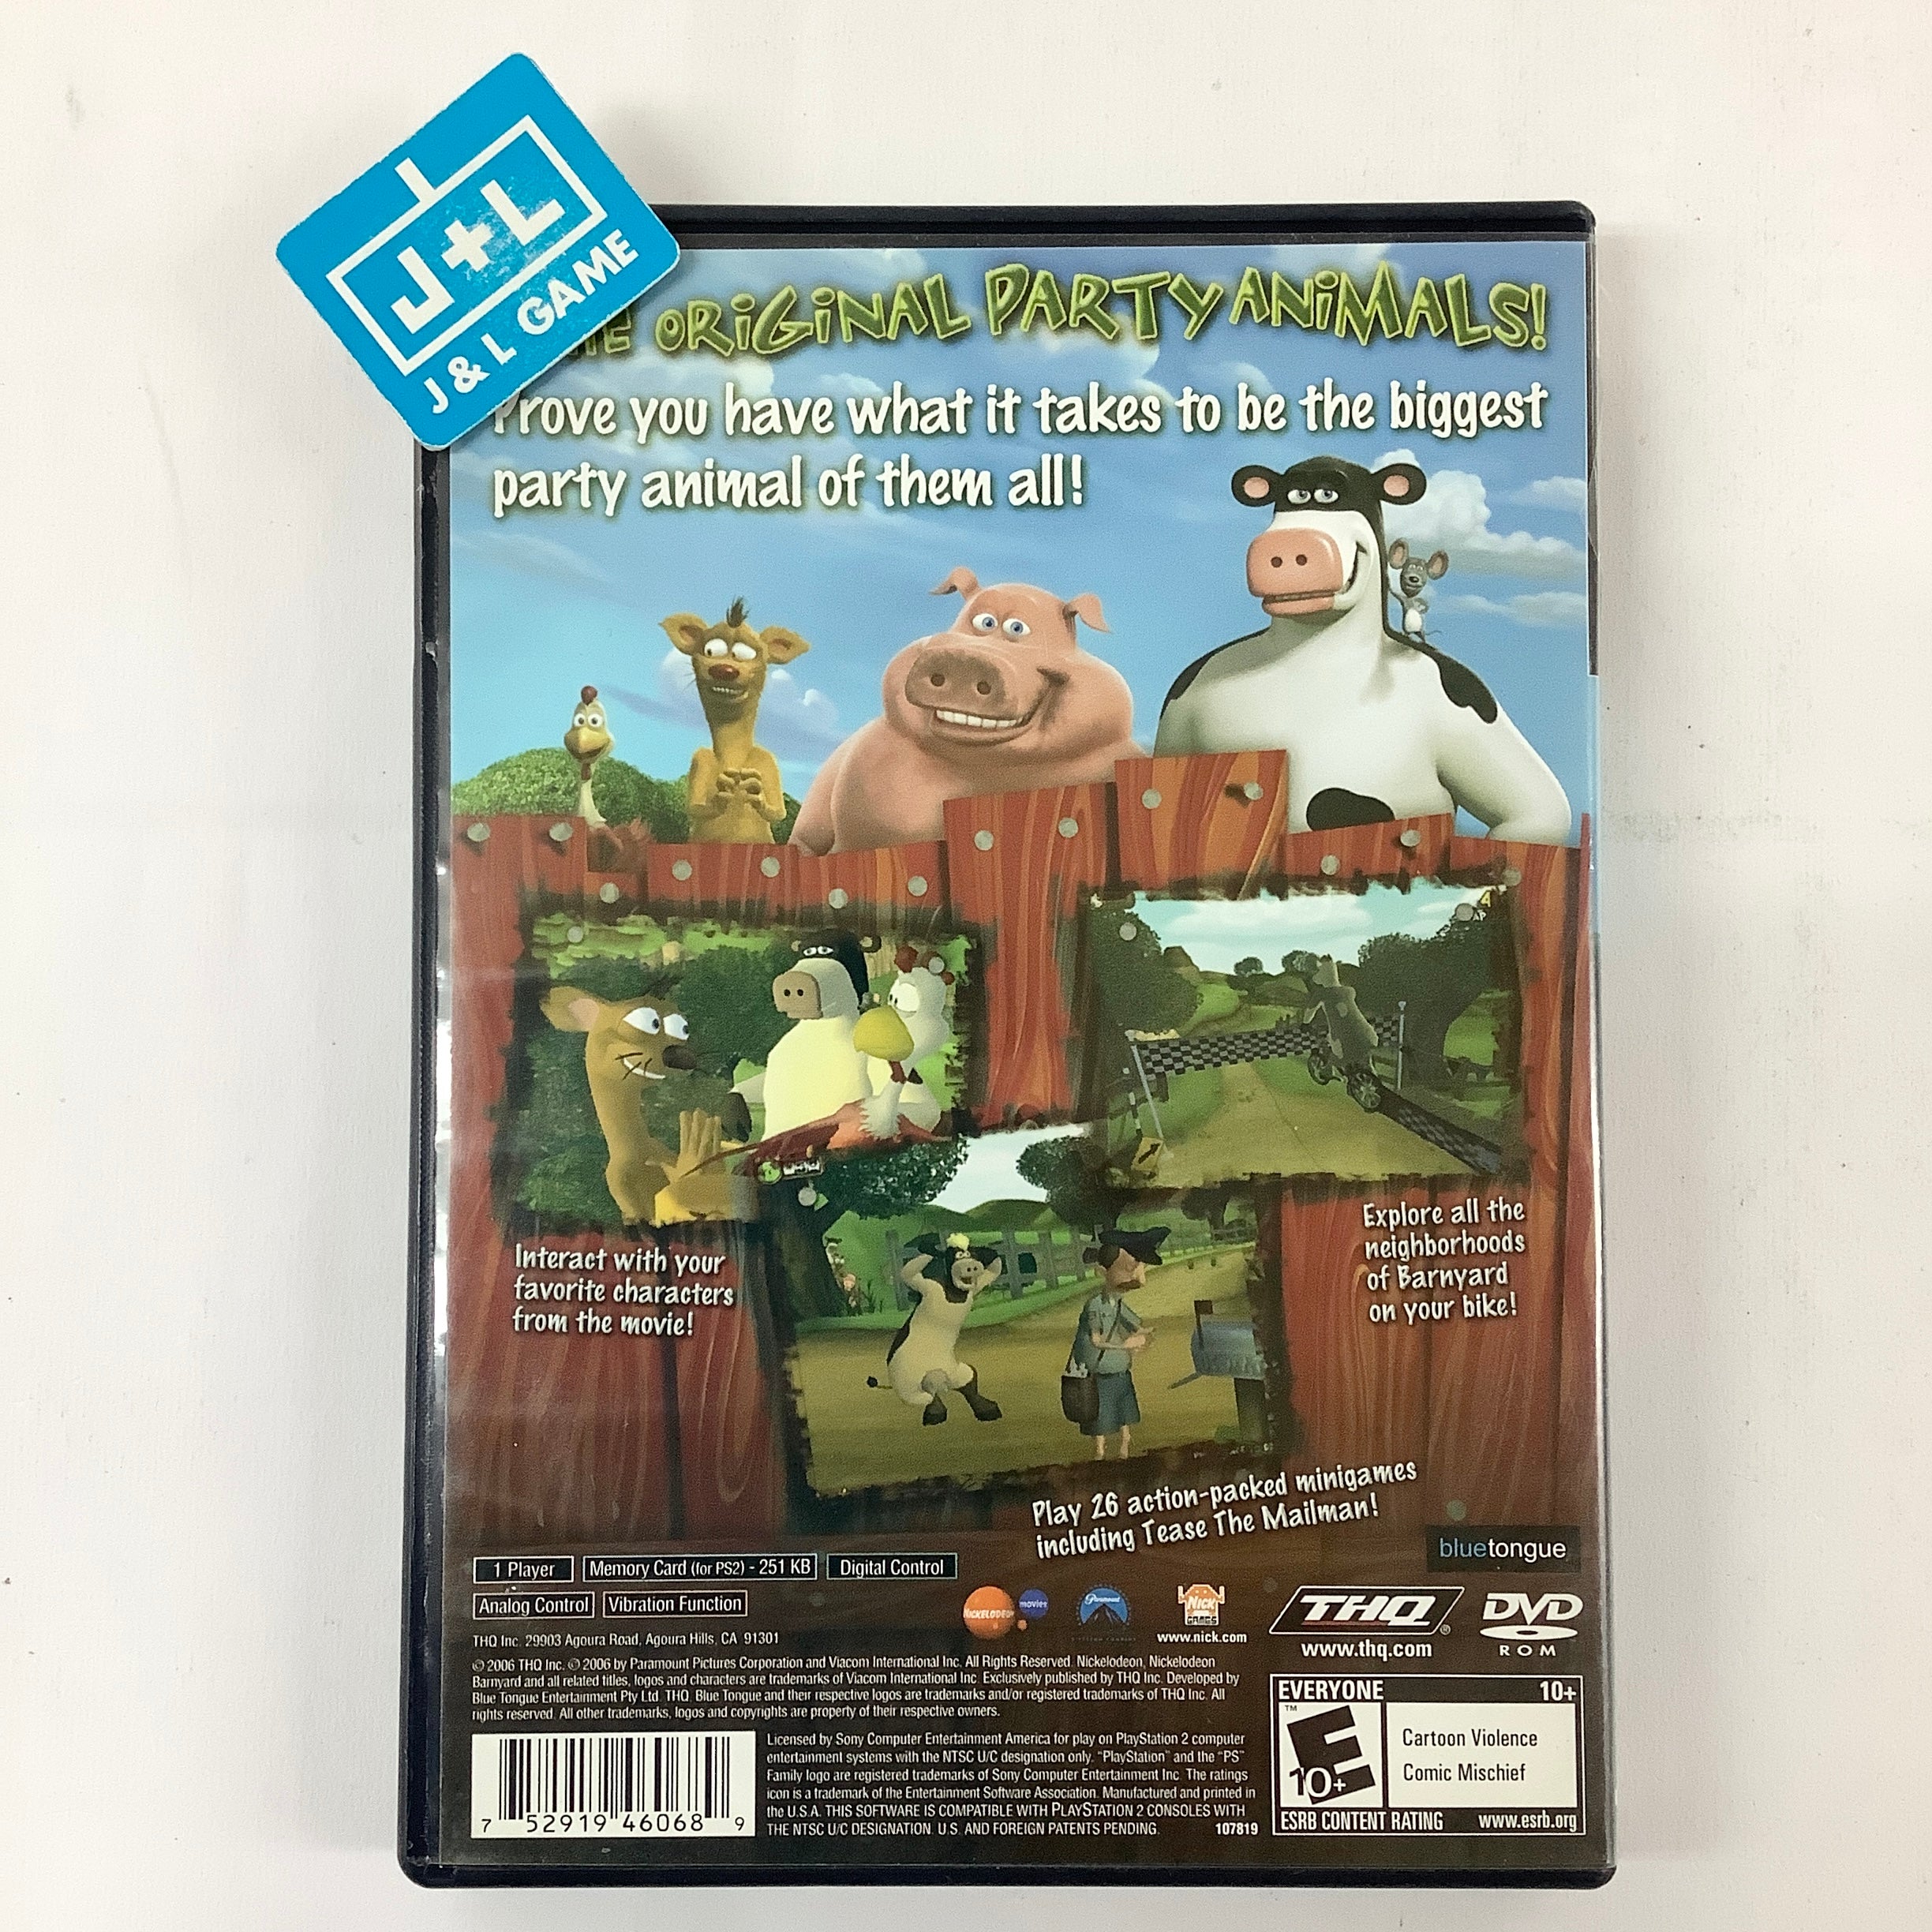 Barnyard - (PS2) PlayStation 2 [Pre-Owned] Video Games THQ   